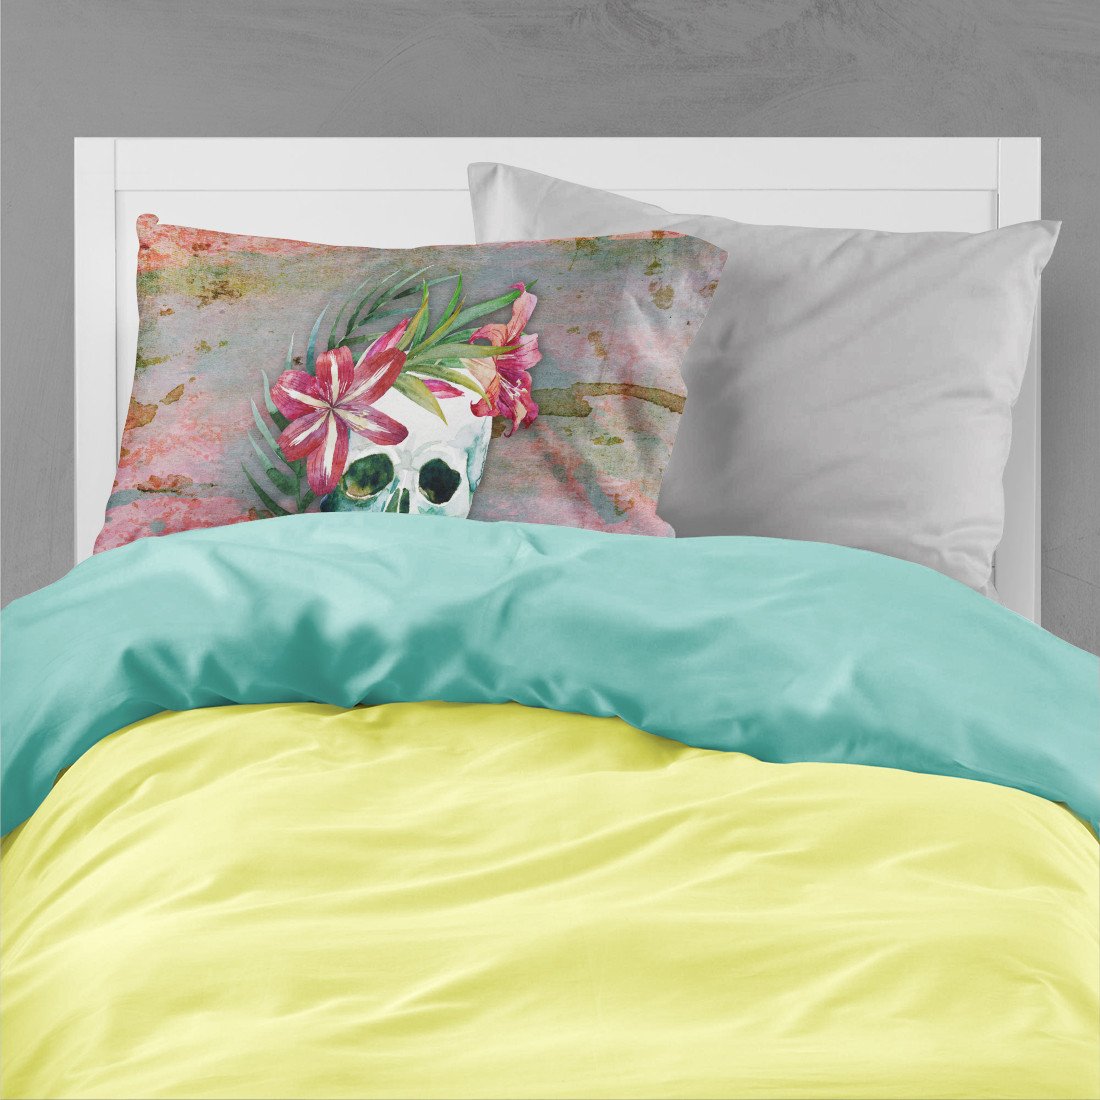 Day of the Dead Skull Flowers Fabric Standard Pillowcase BB5125PILLOWCASE by Caroline's Treasures